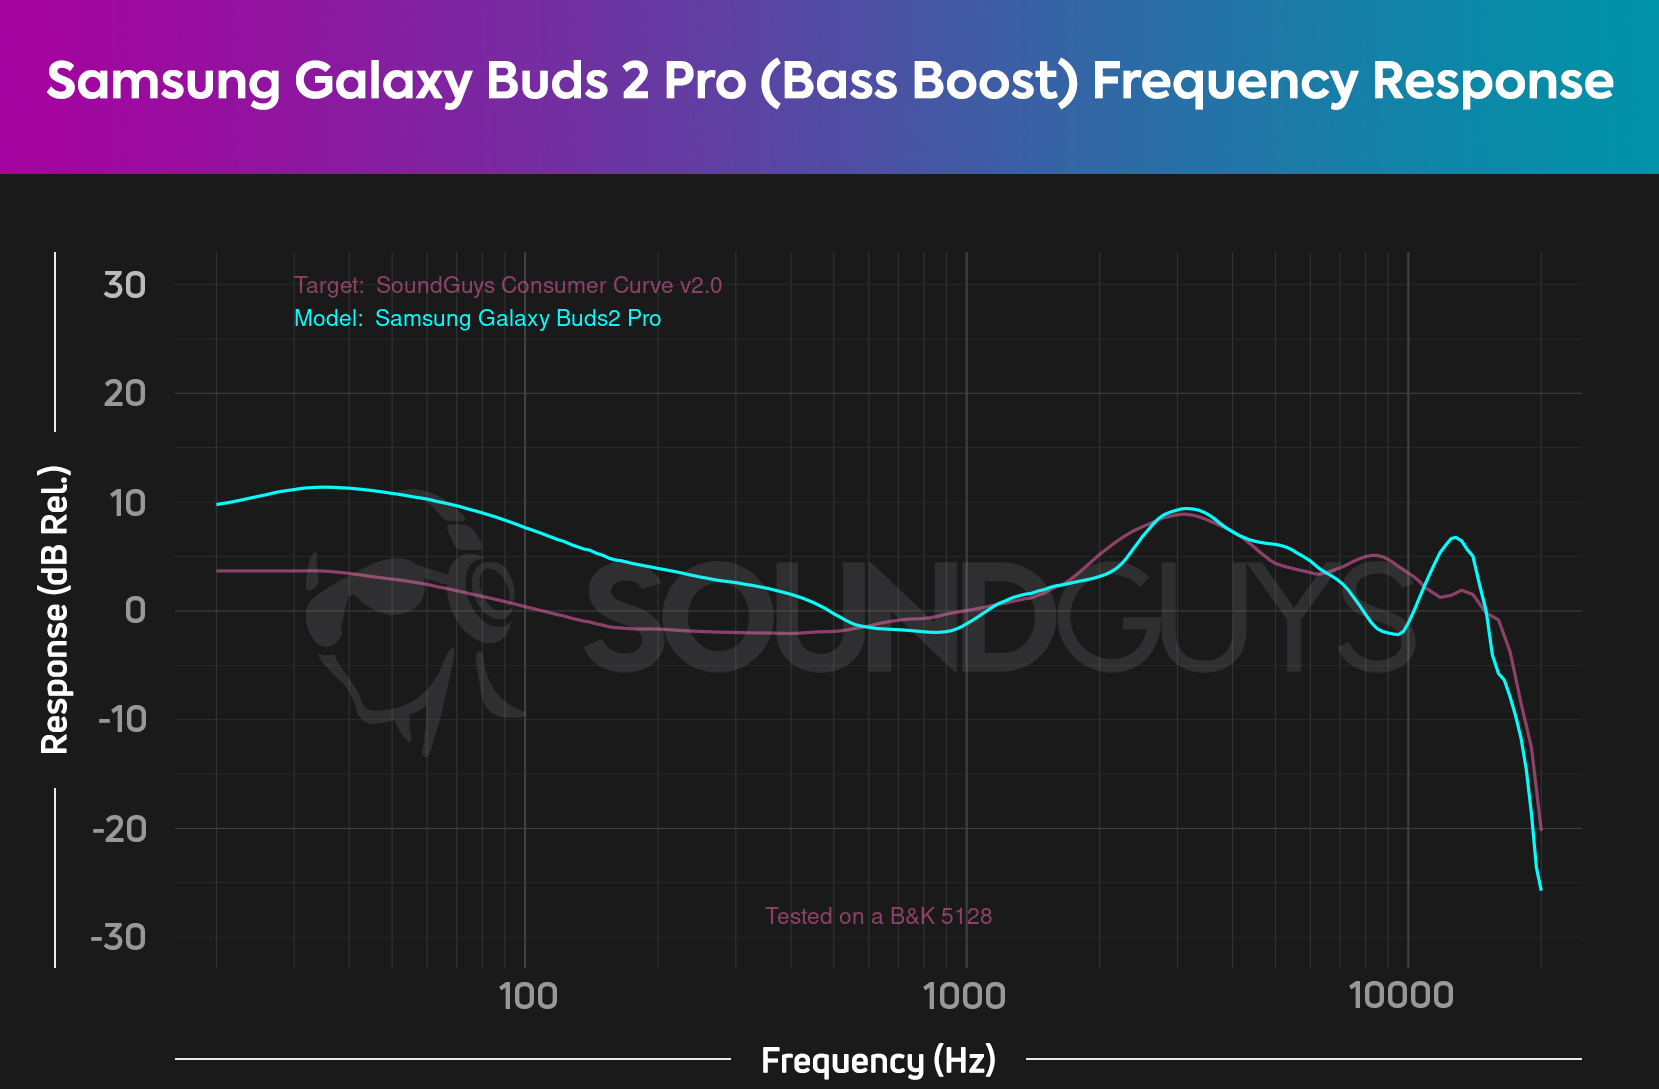 The chart shows the Bass Boost EQ preset frequency response, which boosts bass much more than our target curve.